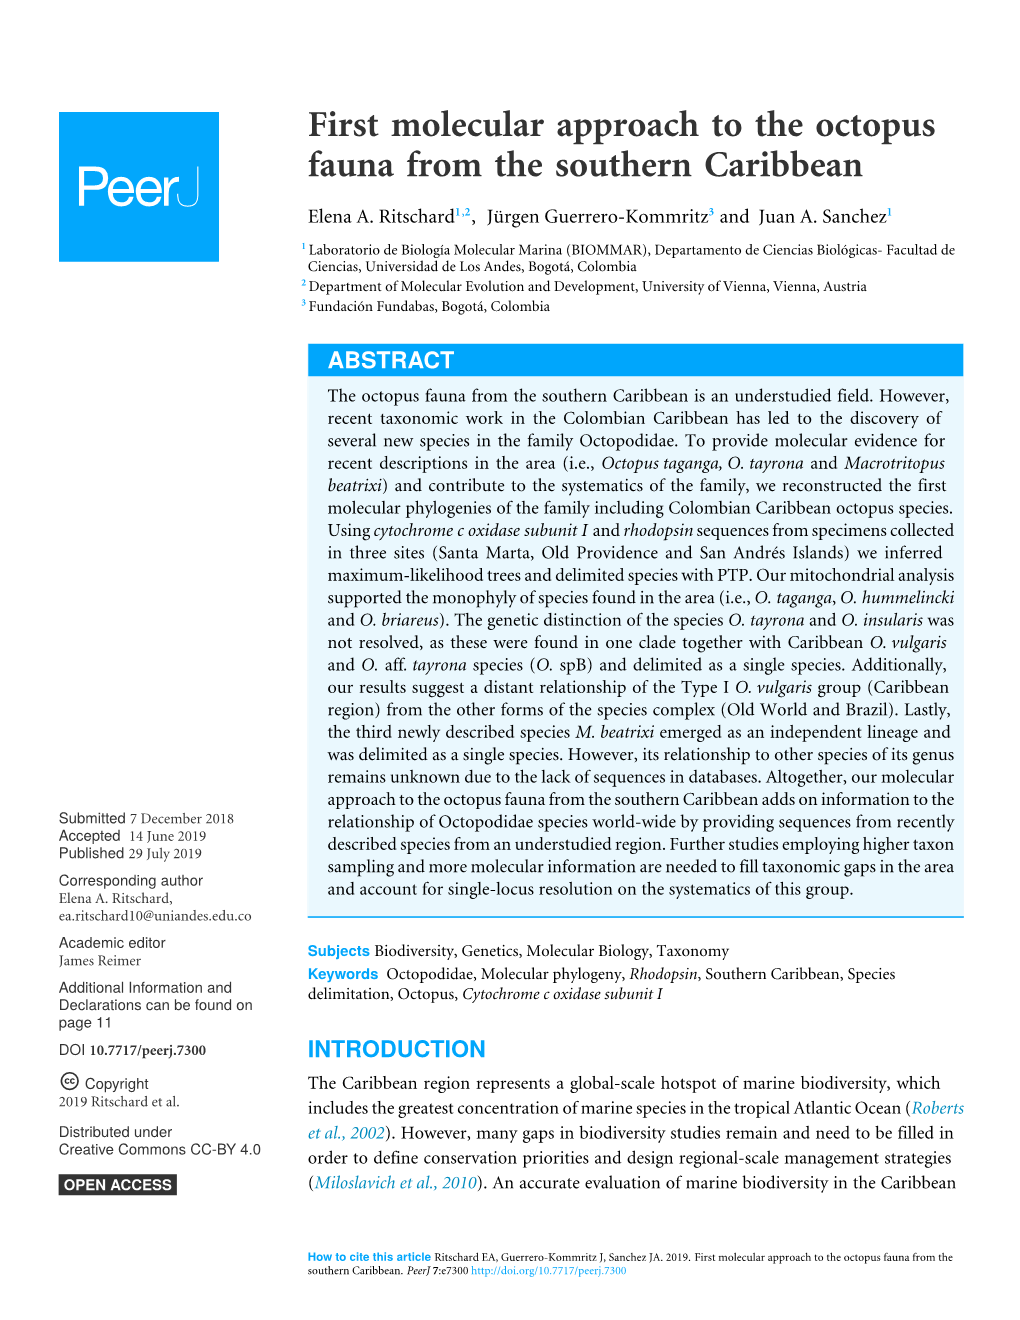 First Molecular Approach to the Octopus Fauna from the Southern Caribbean